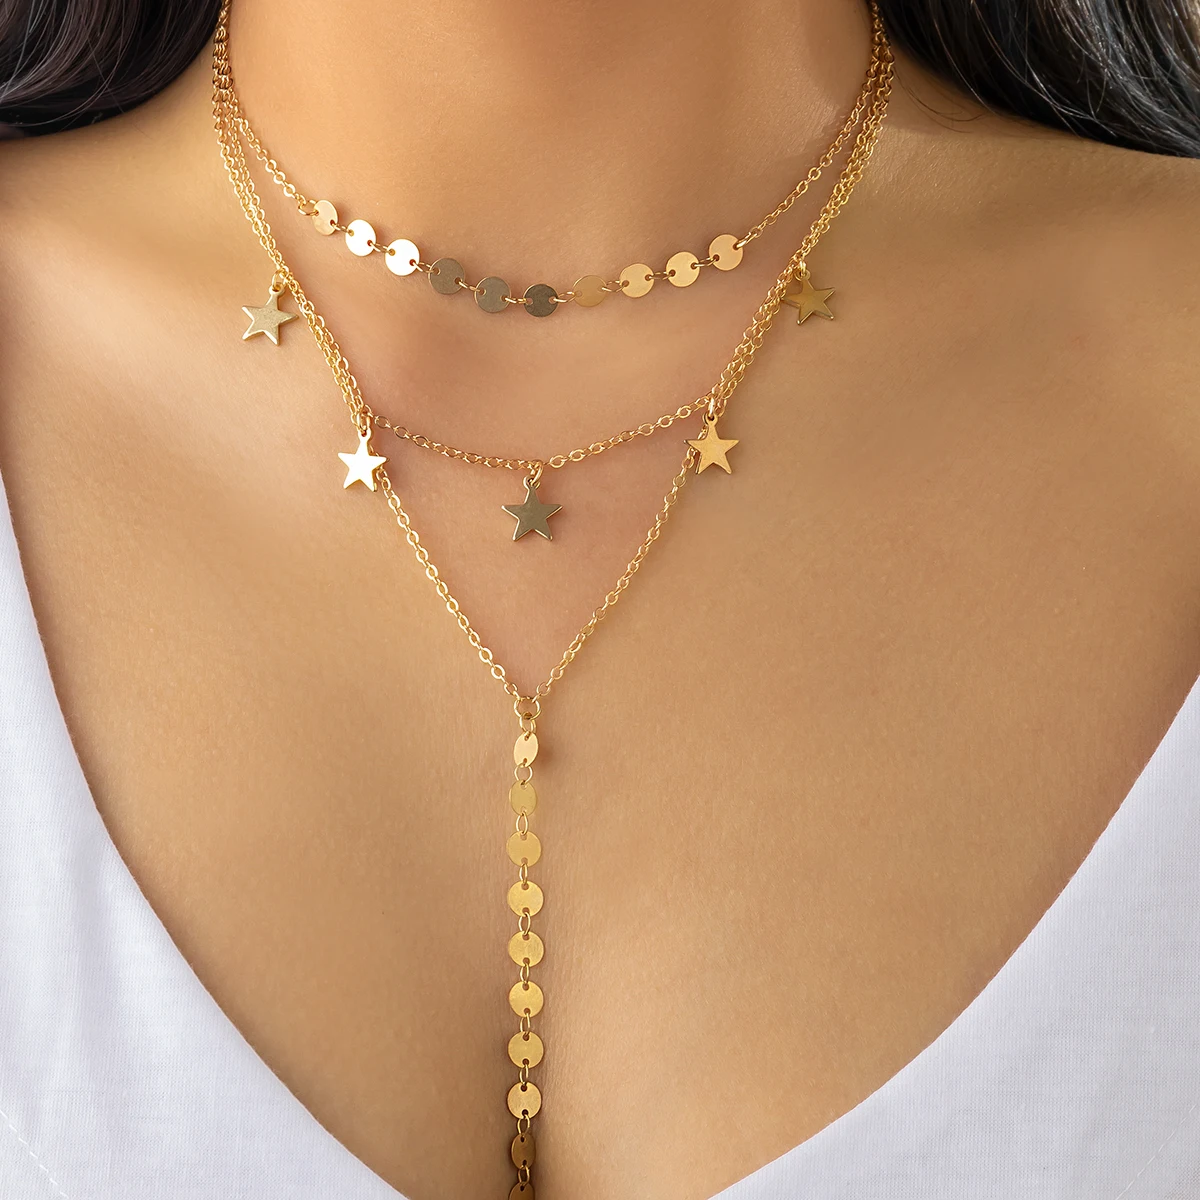 

Layered Chain with Sequins/Stars Pendant Necklace for Women Long Tassels Chain Necklace 2022 Fashion Jewelry on Neck Accessories